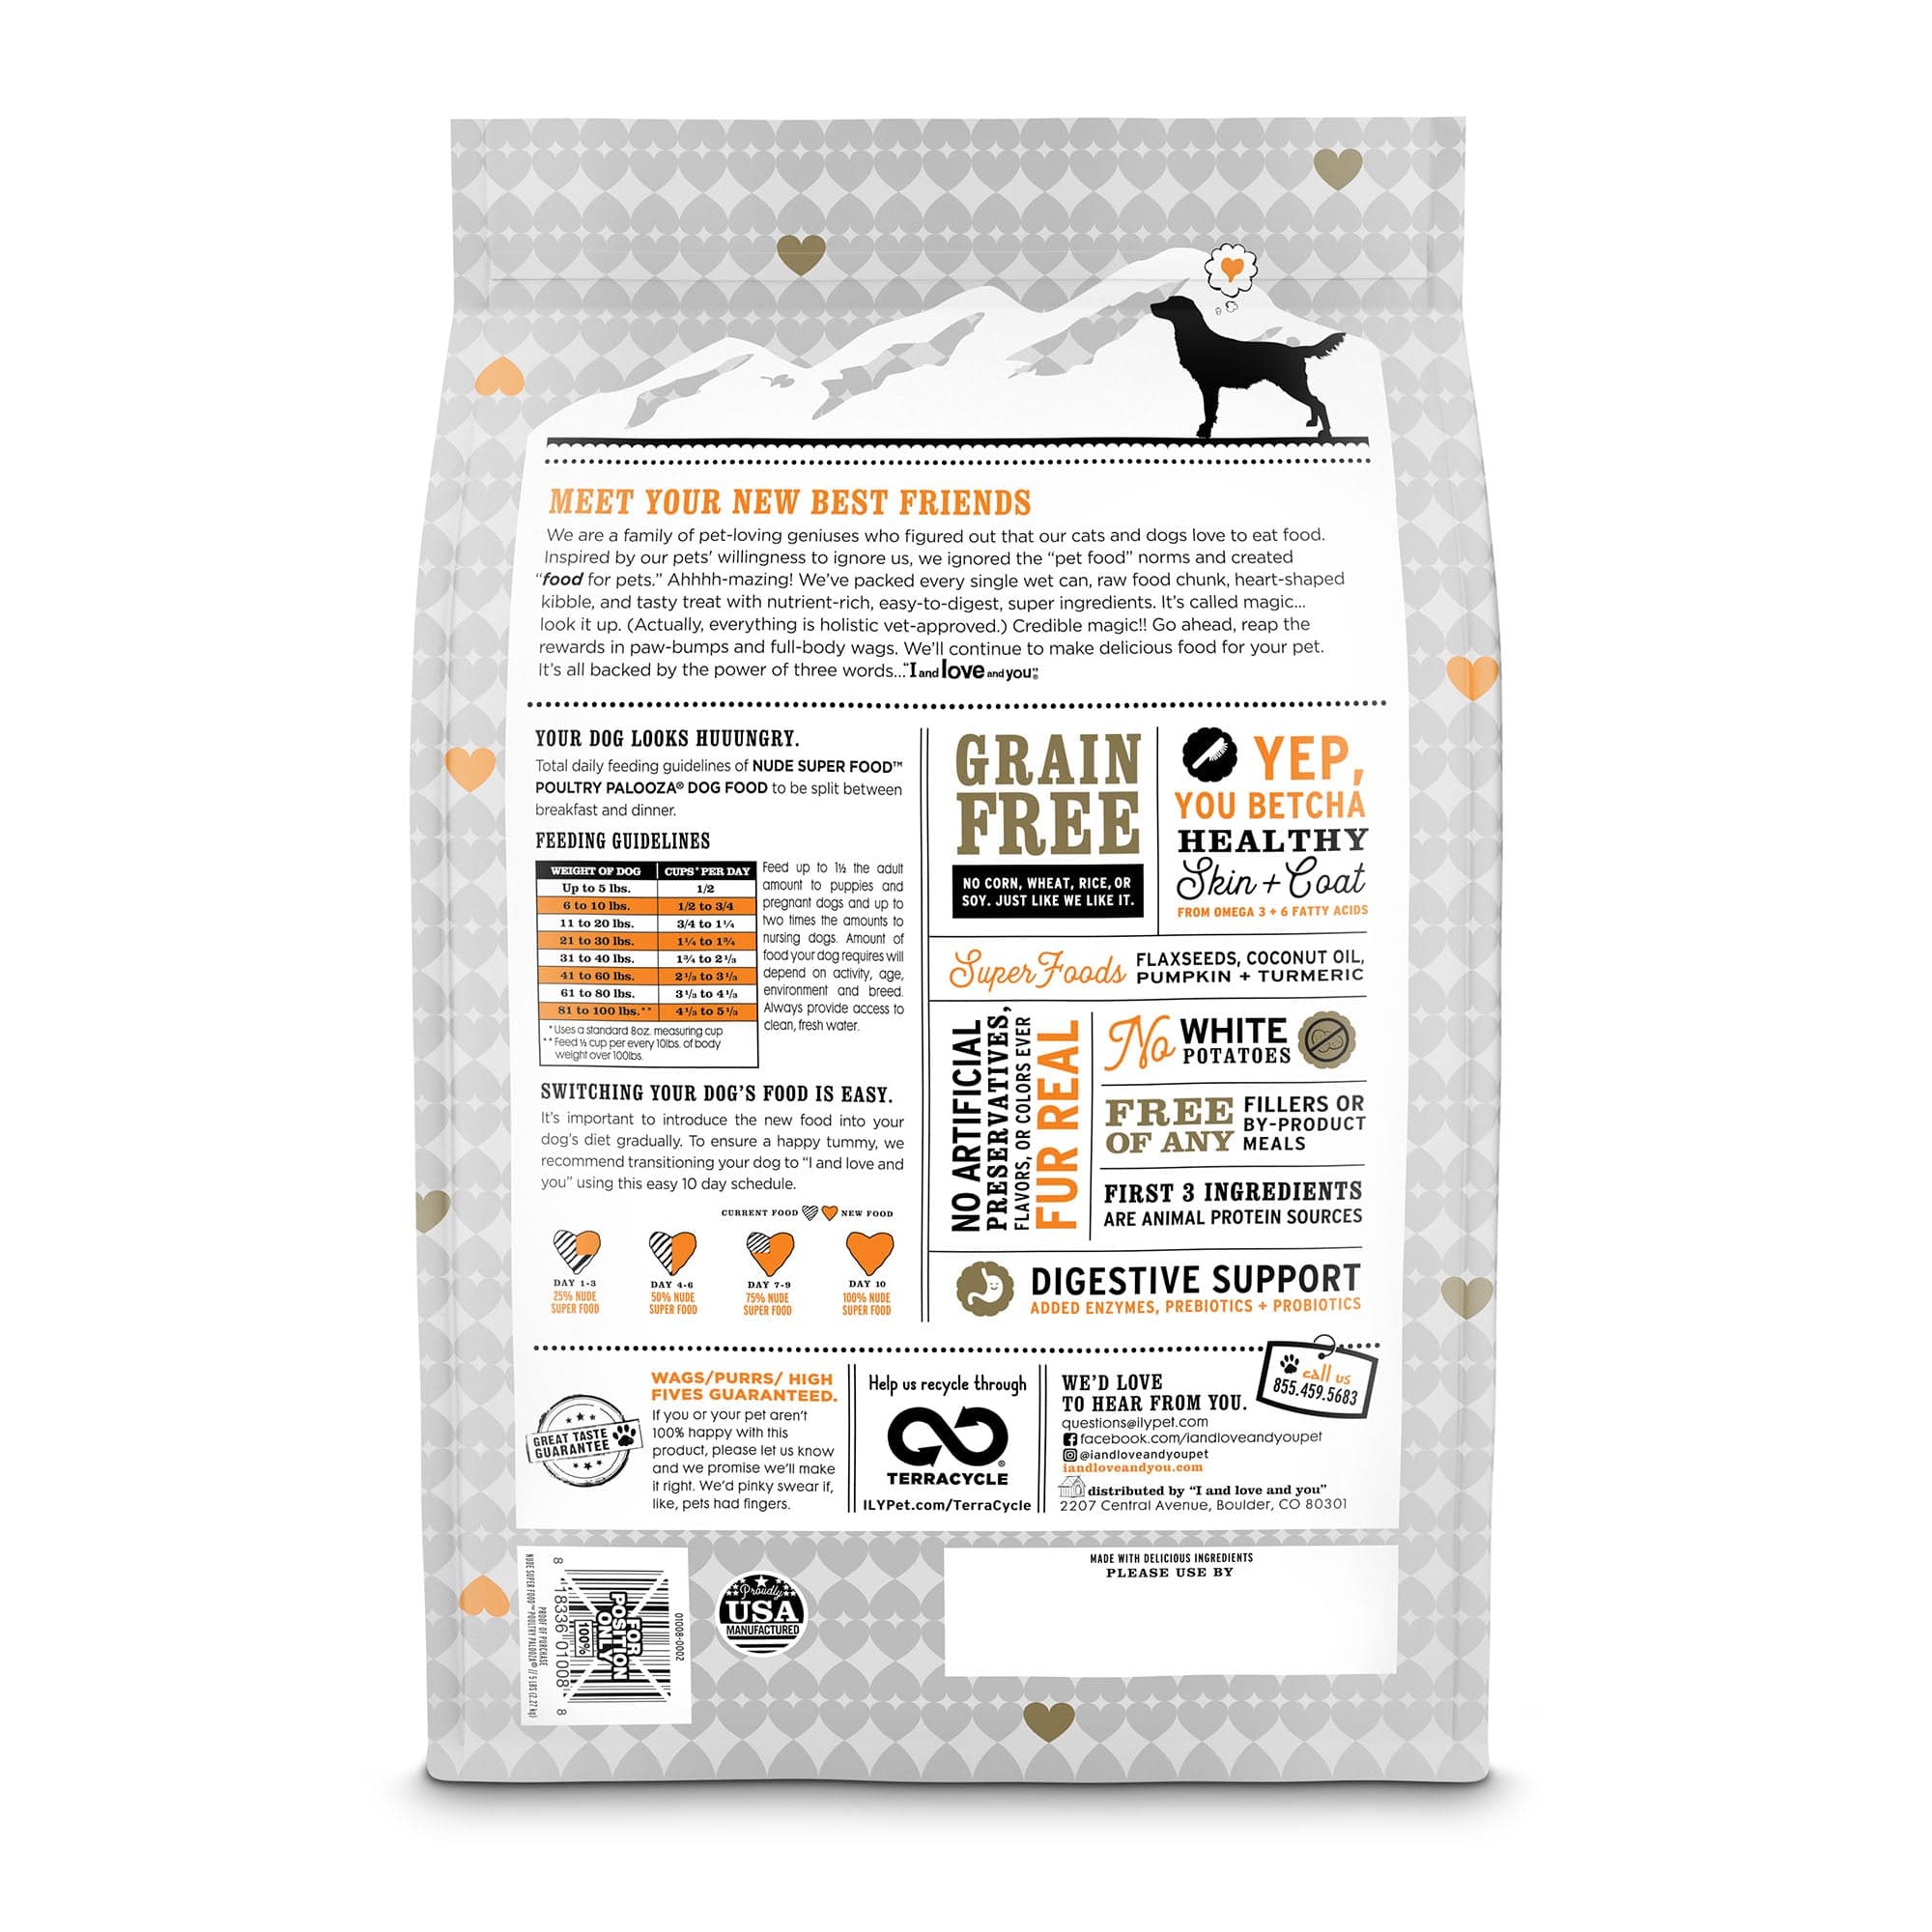 Nude Super Food - Poultry Palooza: A bag of dog food with a close-up silhouette of a dog, showcasing premium kibble with 34% protein from poultry, superfoods, and digestive enzymes.